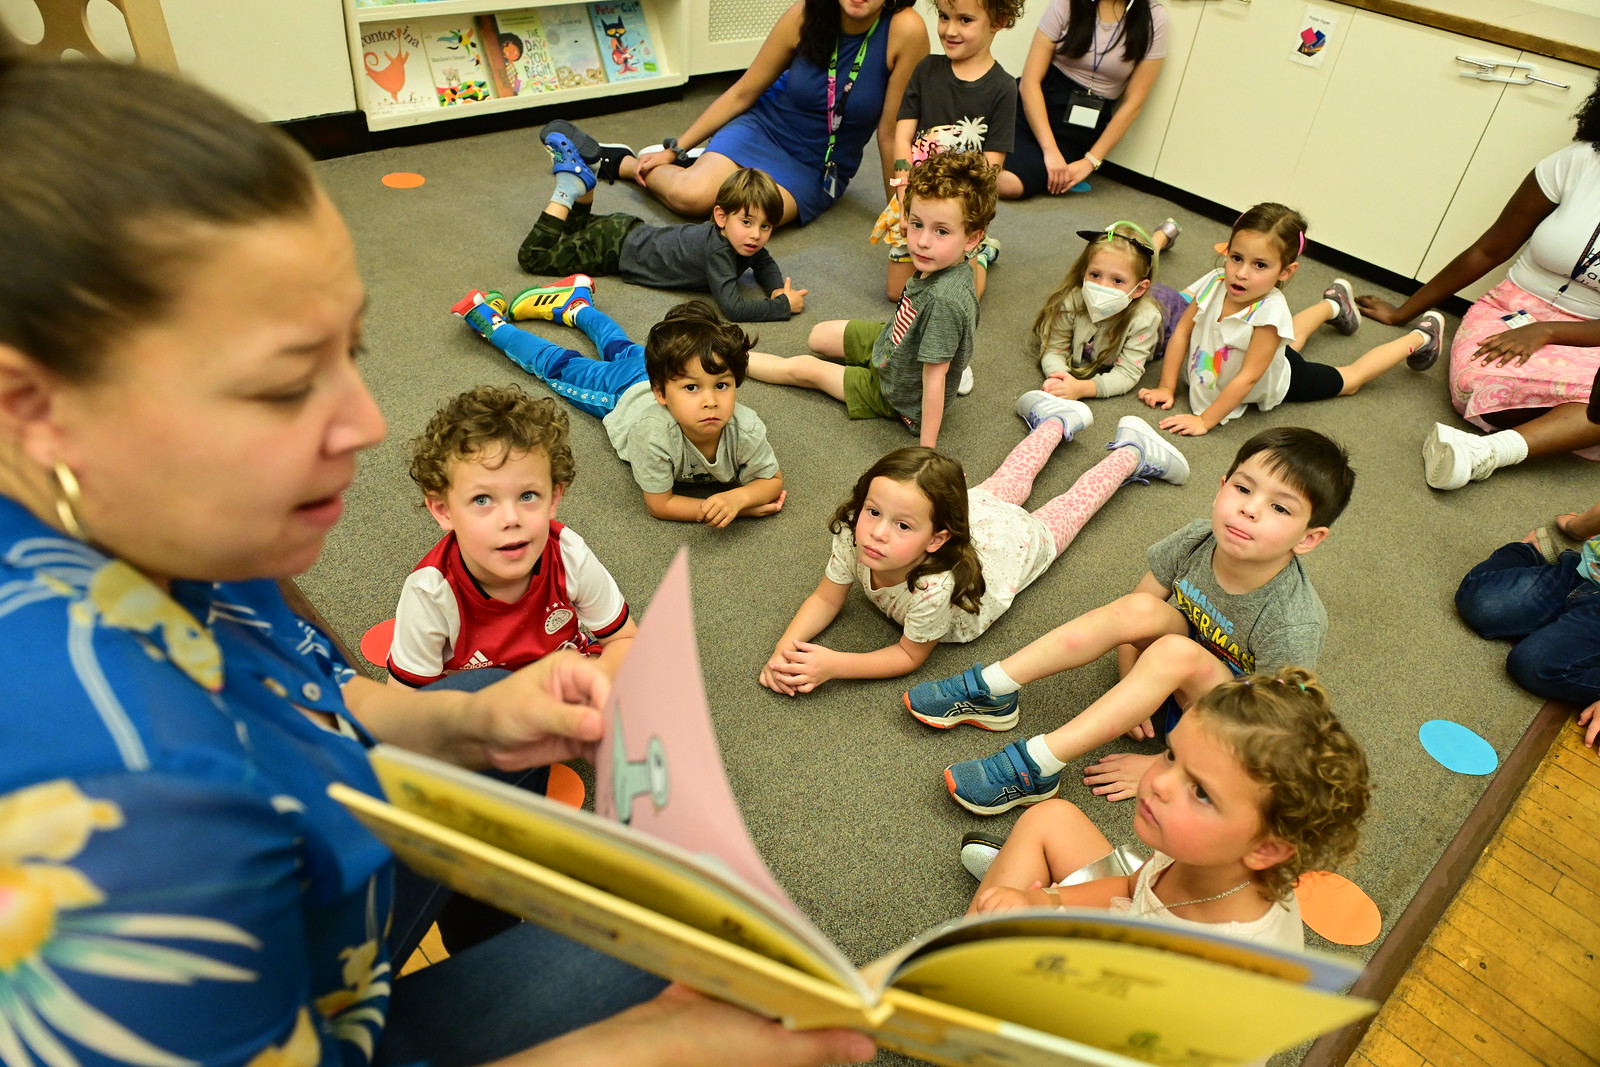 Ethical Culture's youngest learners listen on carpet as teacher reads from a book.